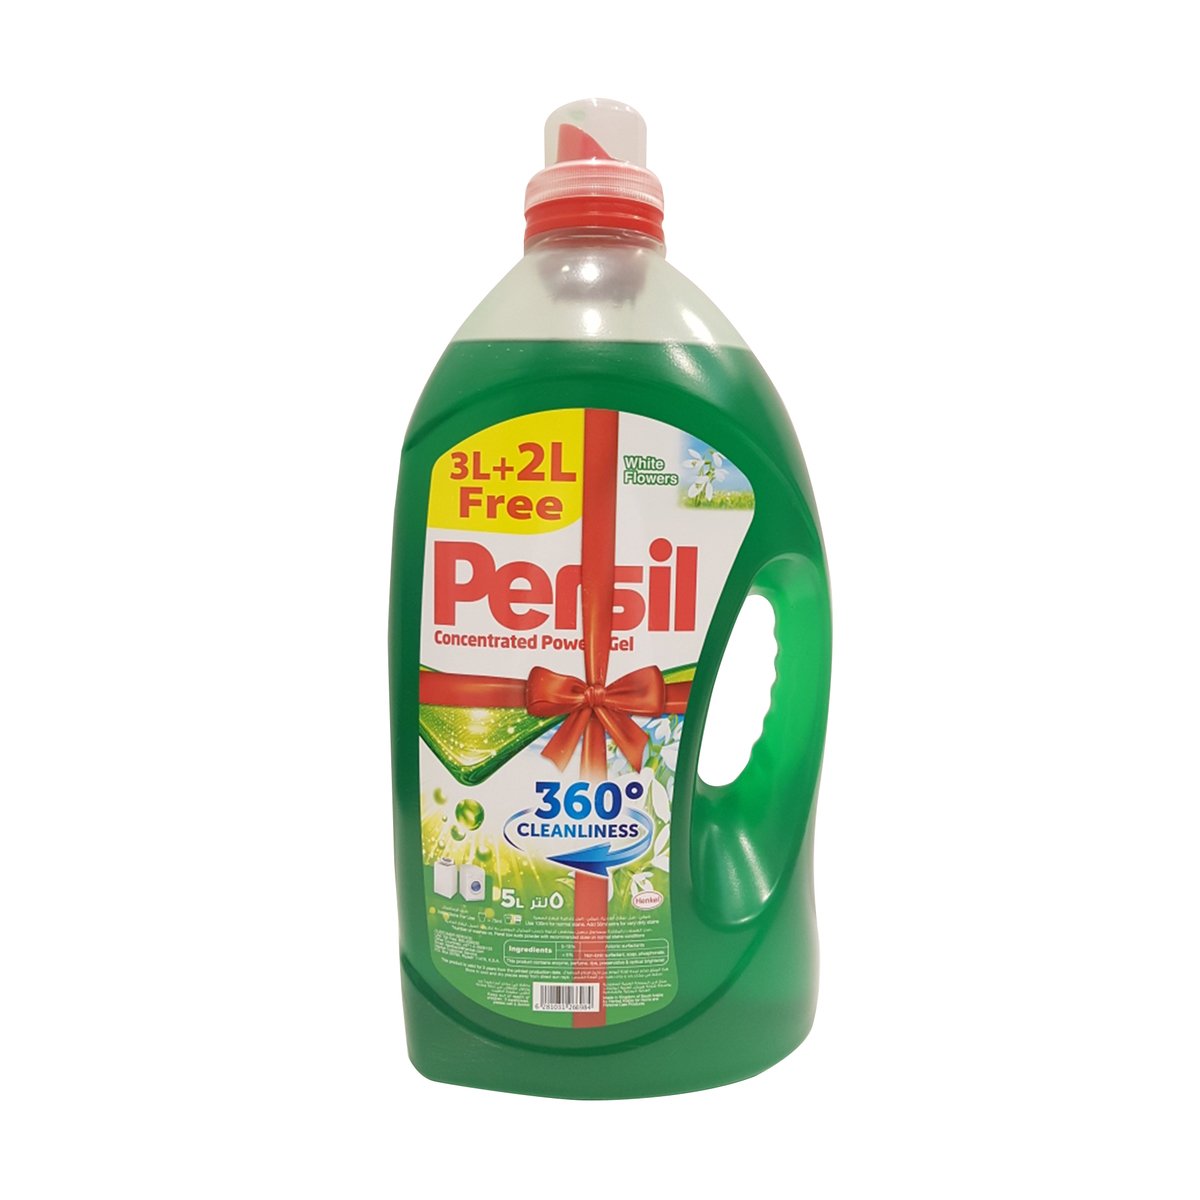 Persil Concentrated Power Gel White Flowers 3Litre + 2Litre Free